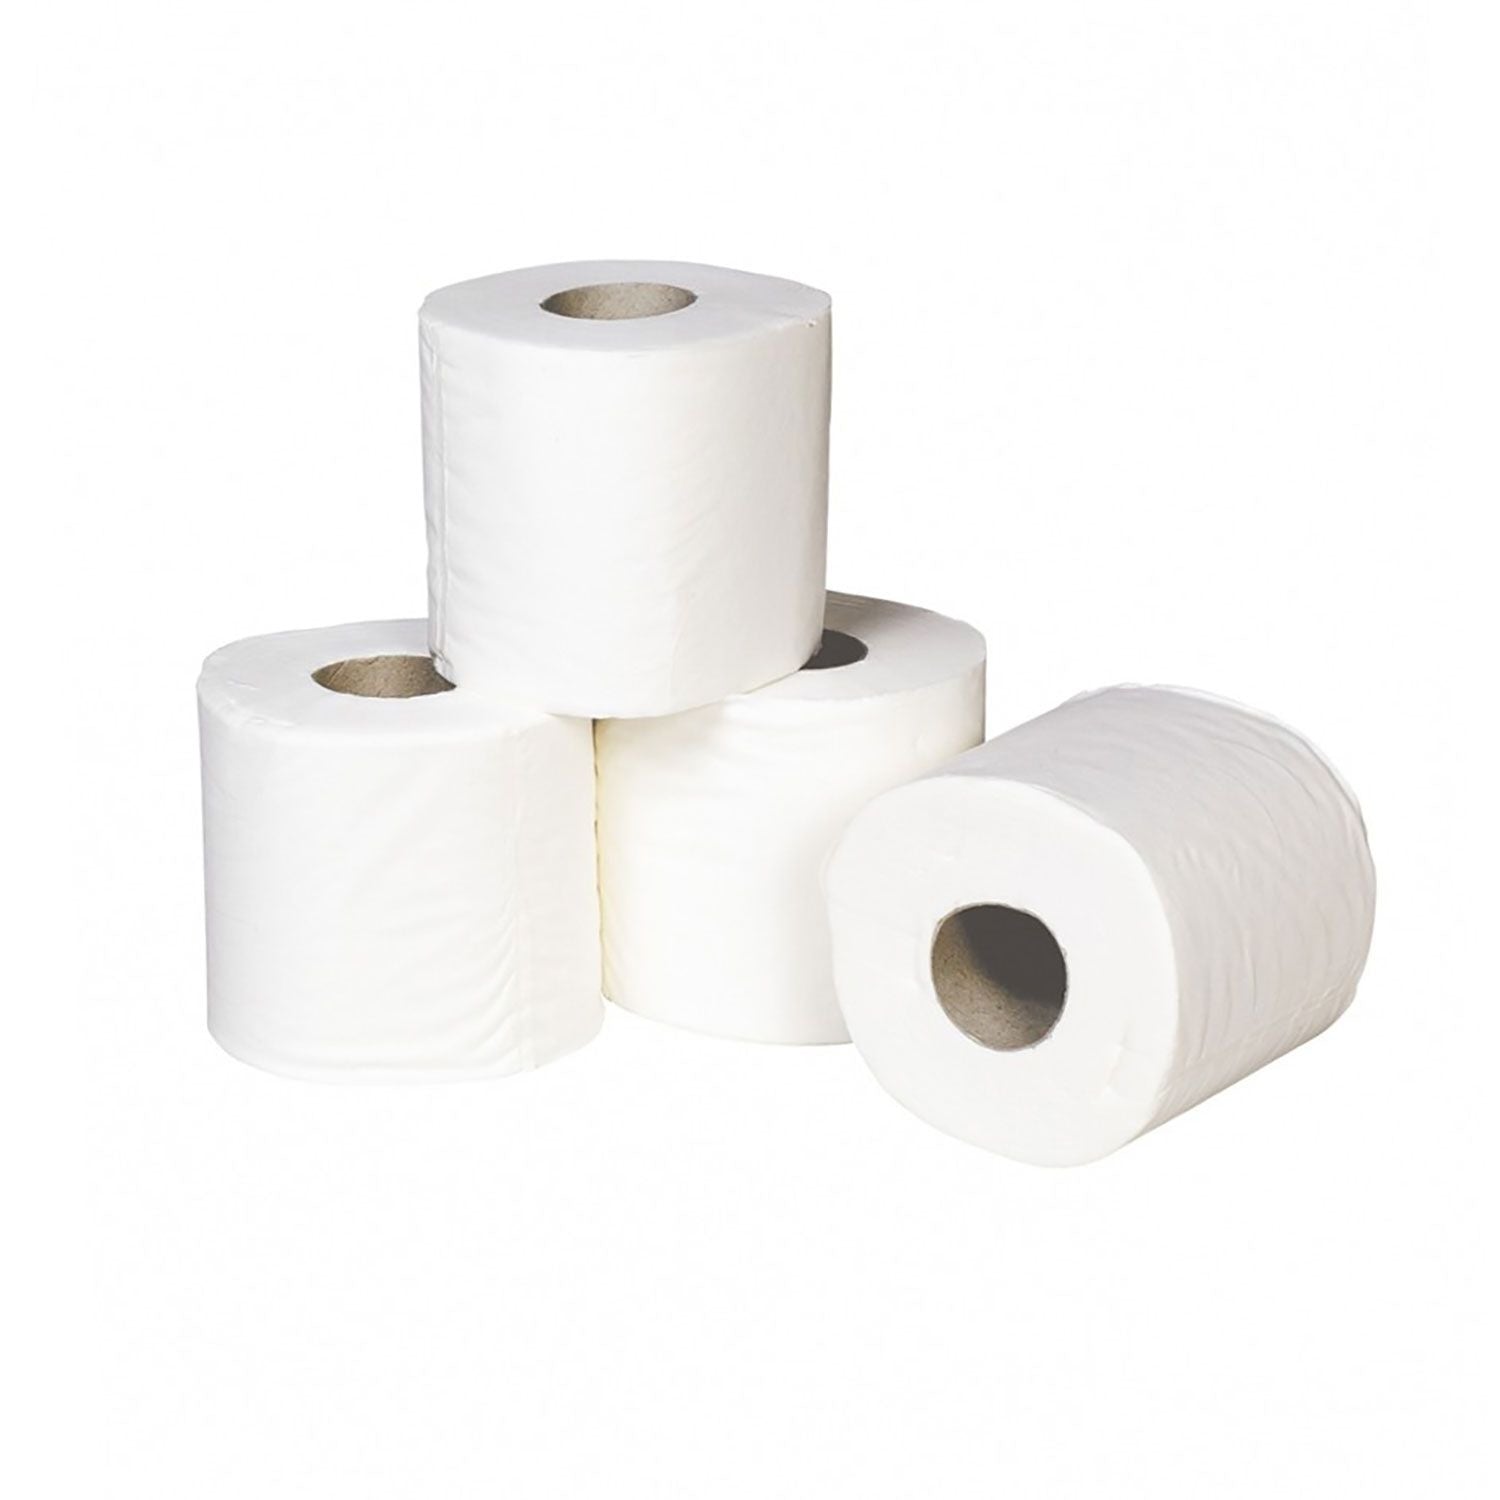 Toilet Rolls | Large | 320 Sheets Per Roll | Case of 36 Rolls